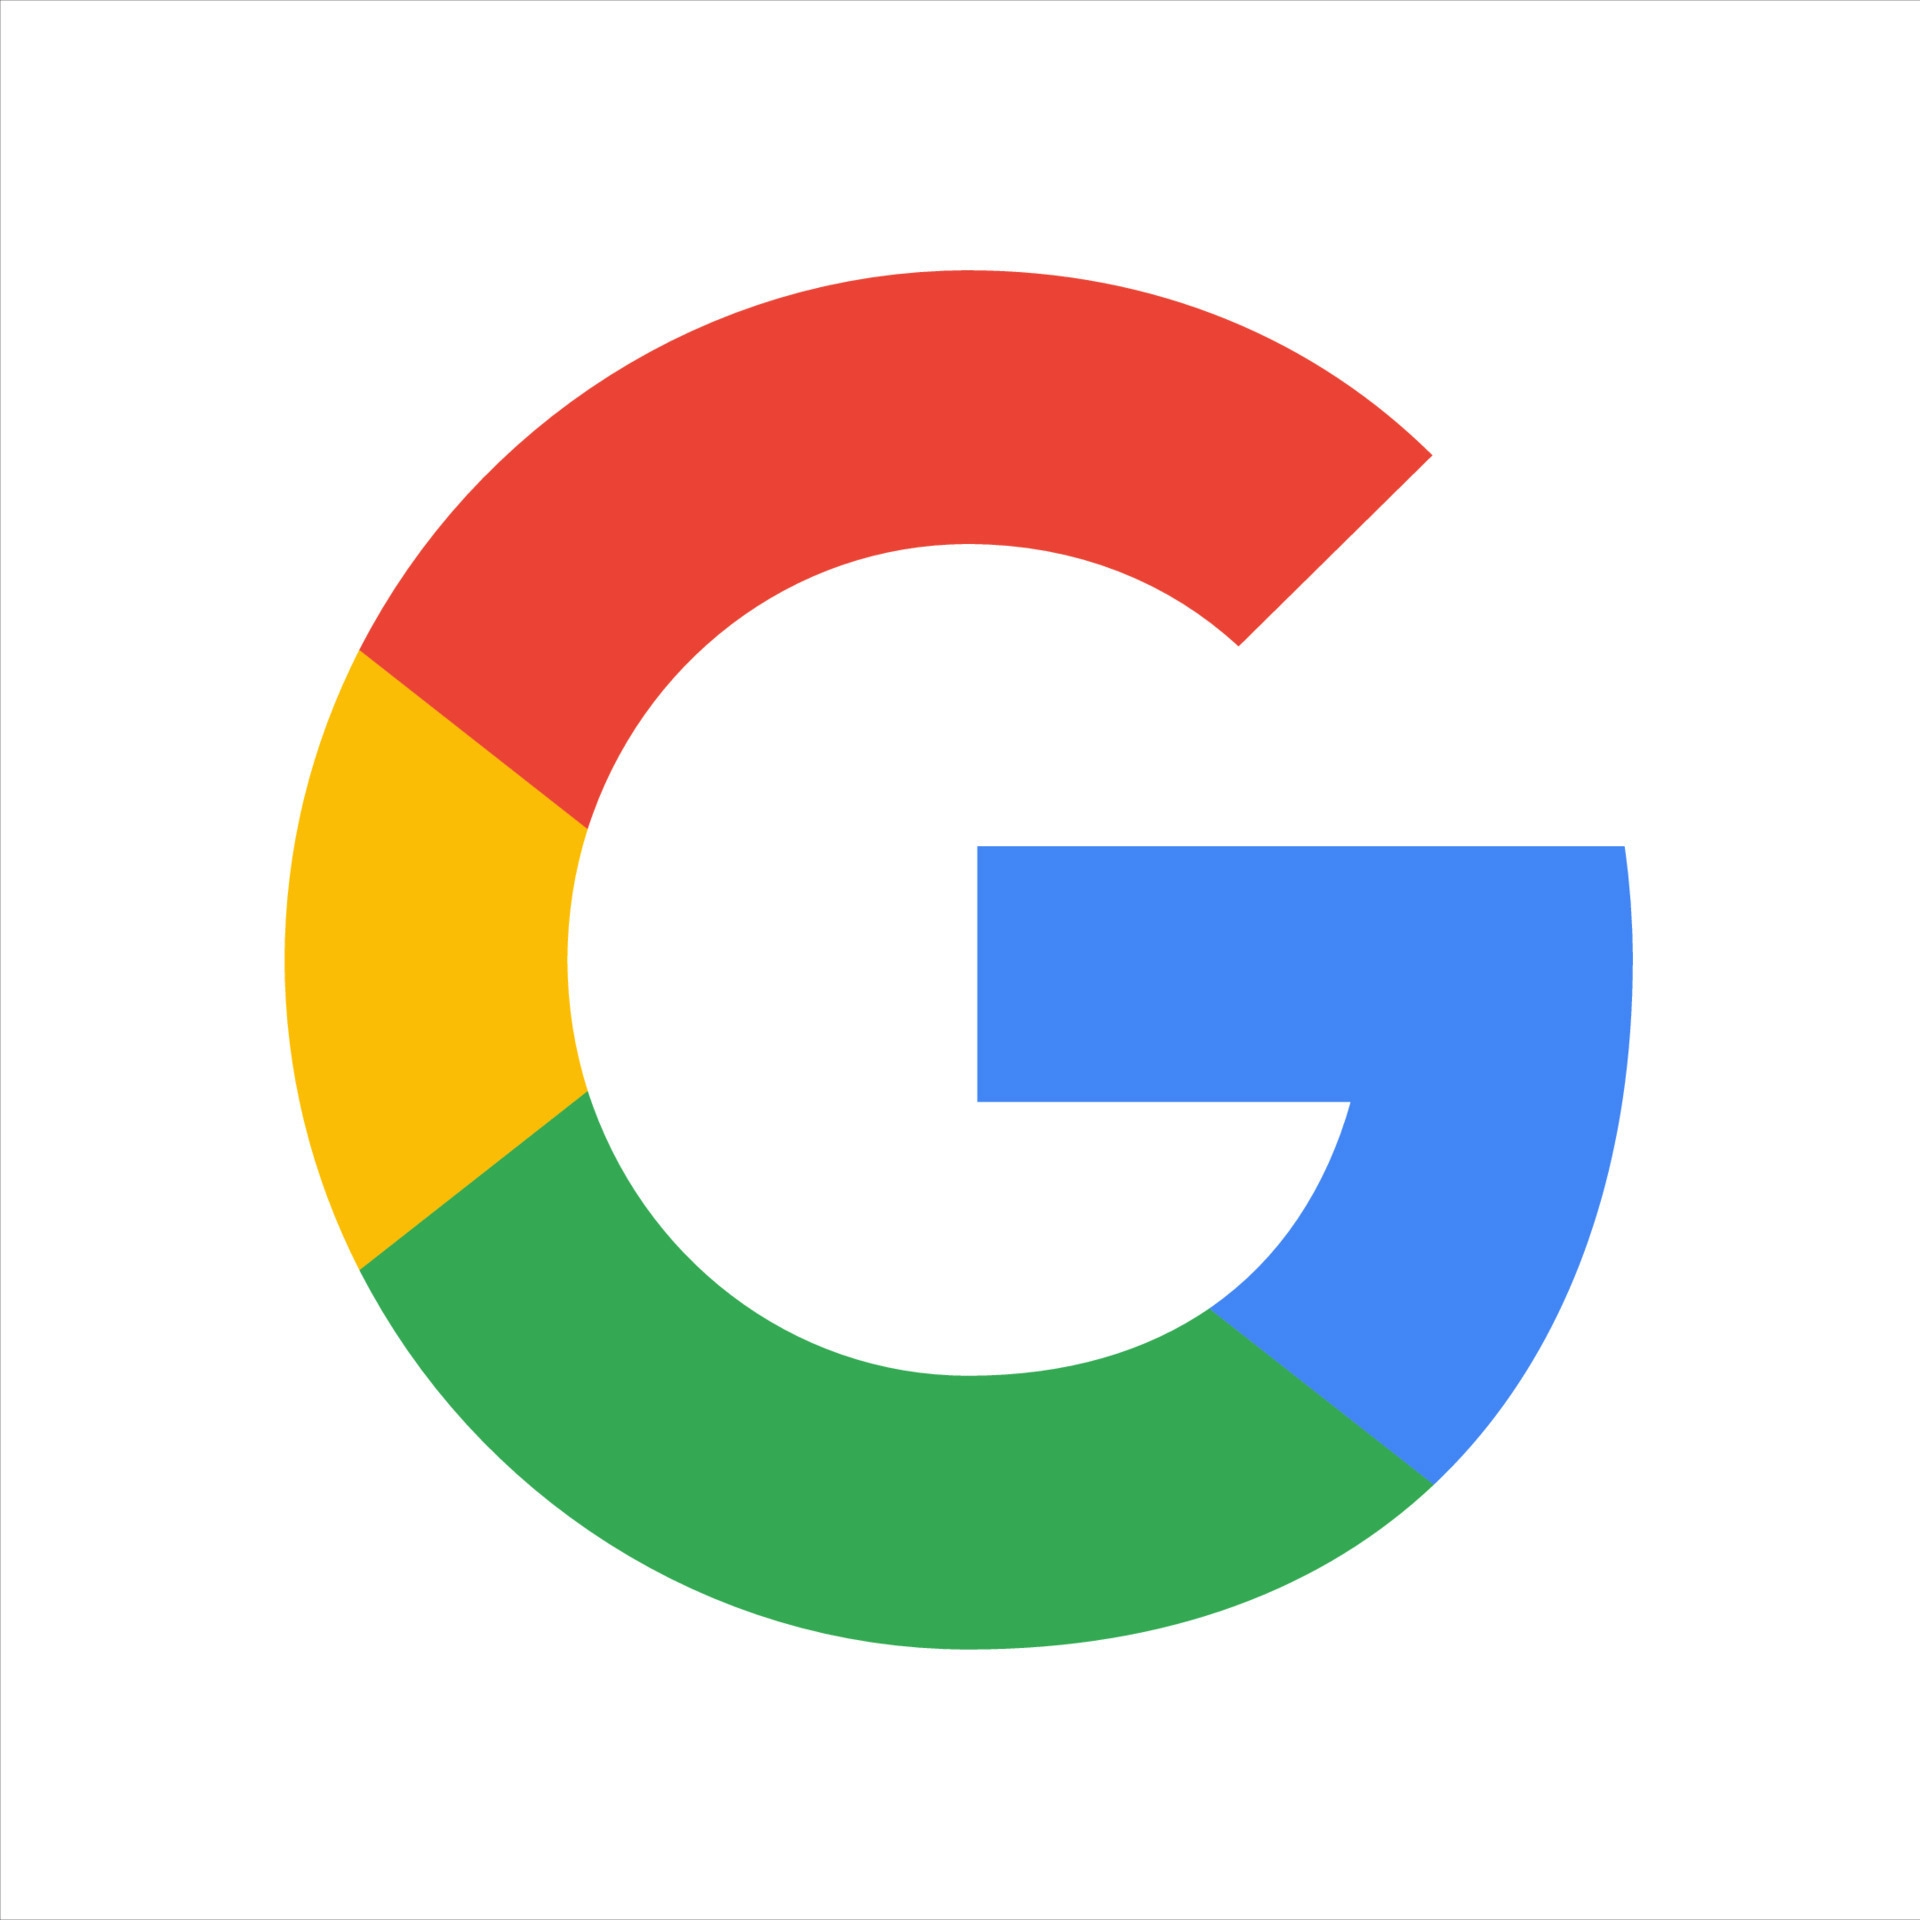 colourful google logo on white background free vector